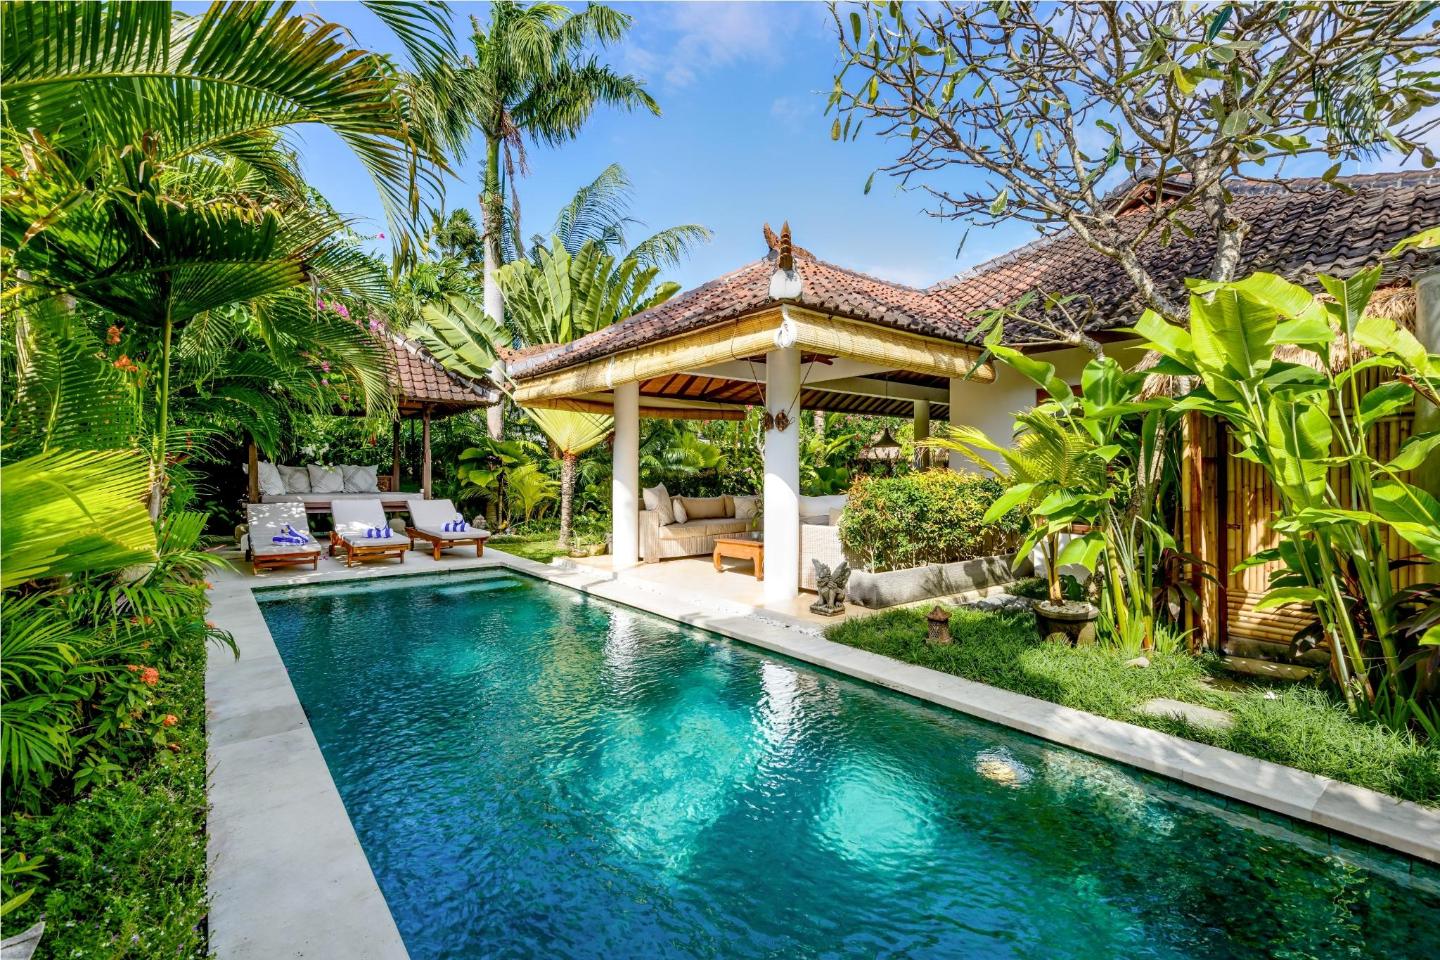 What are the best Budget hotels in Seminyak?